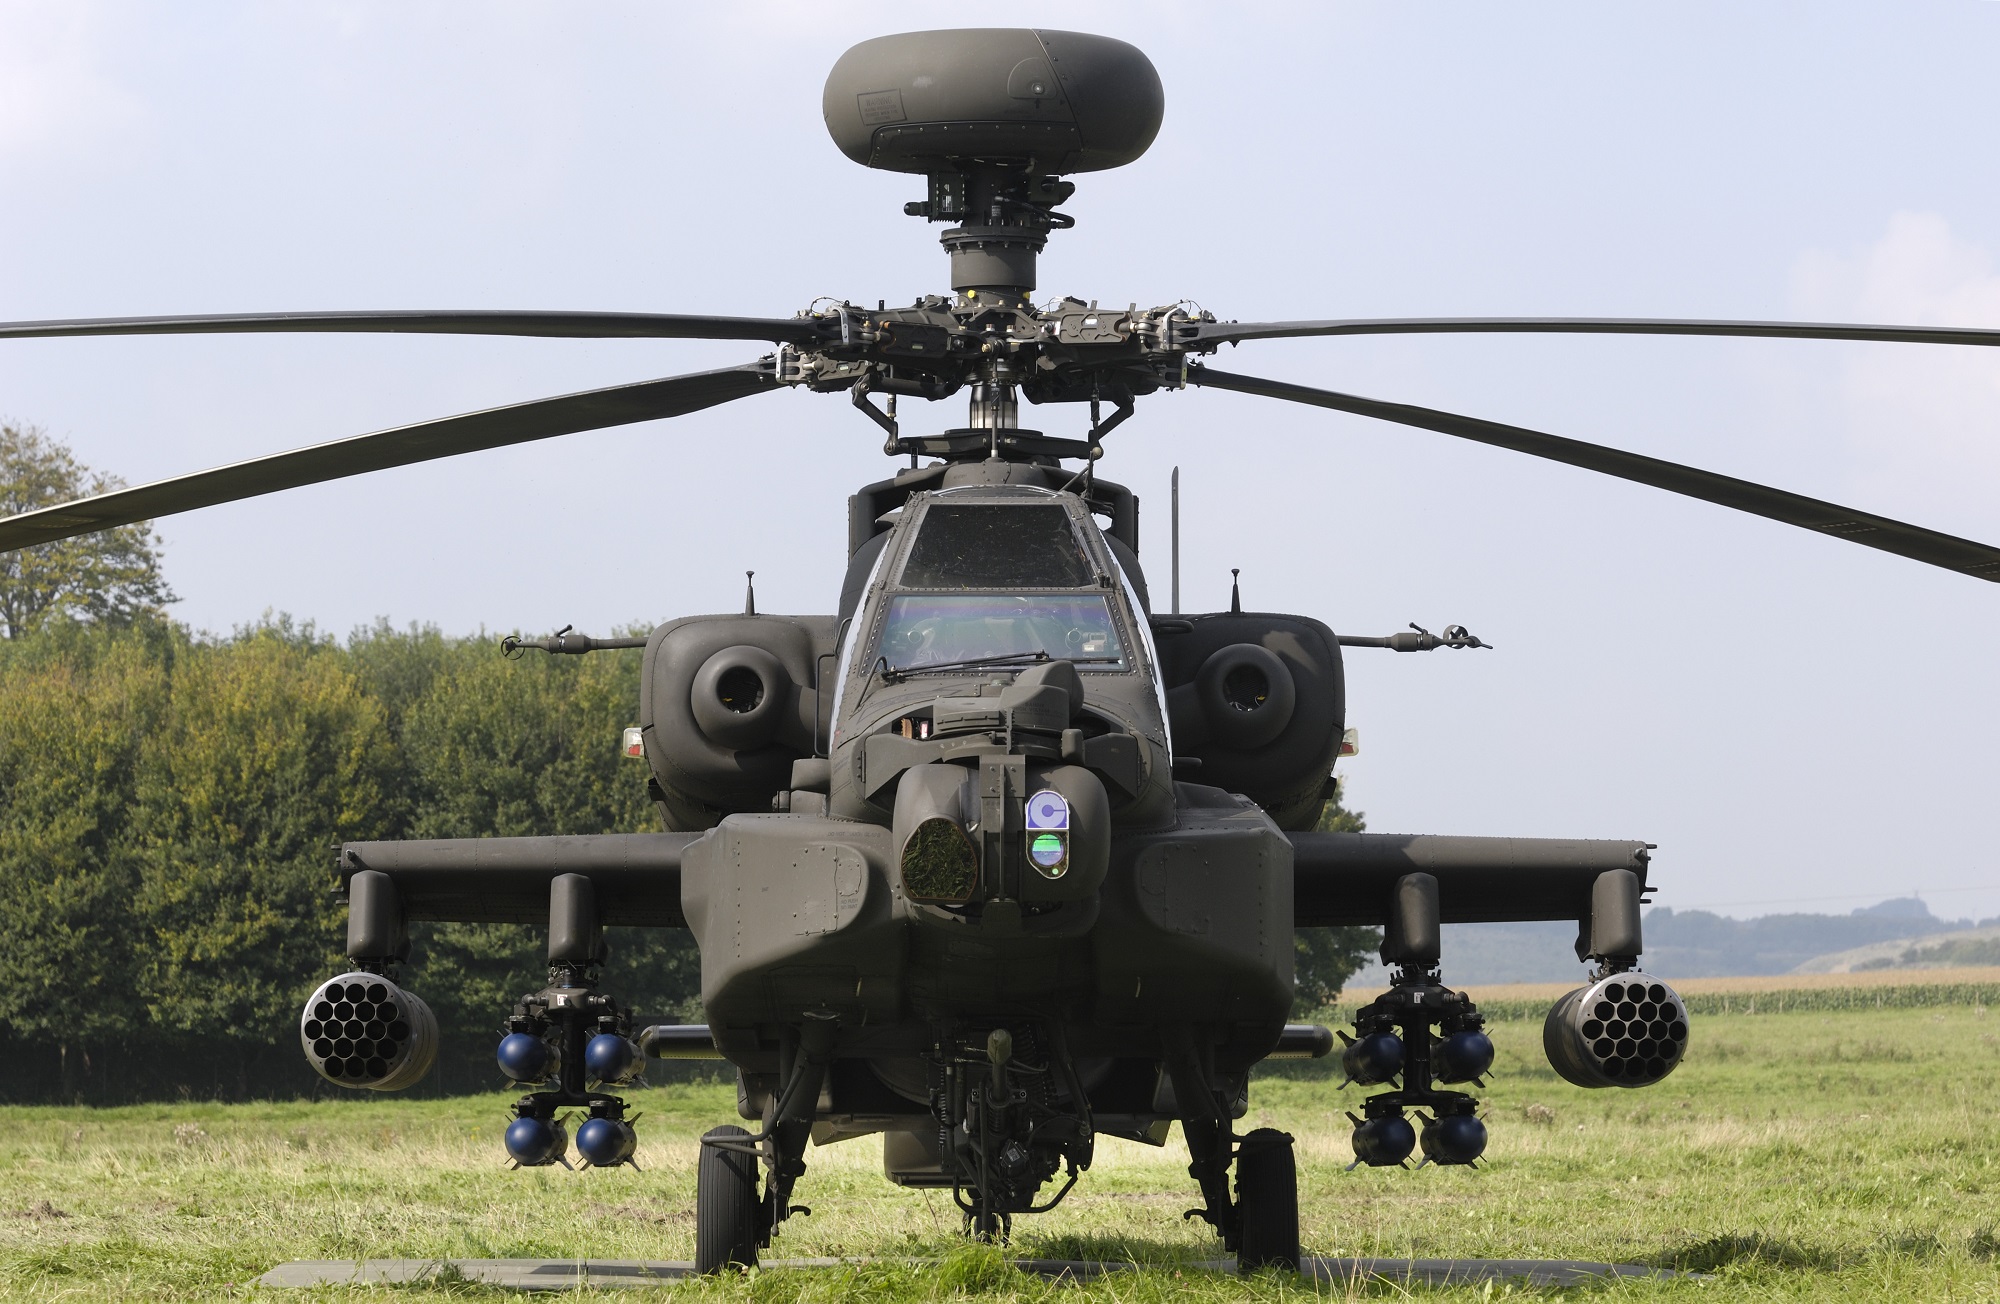 The Apache helicopter is a battlefield beast that shares its name with the Apache V8.